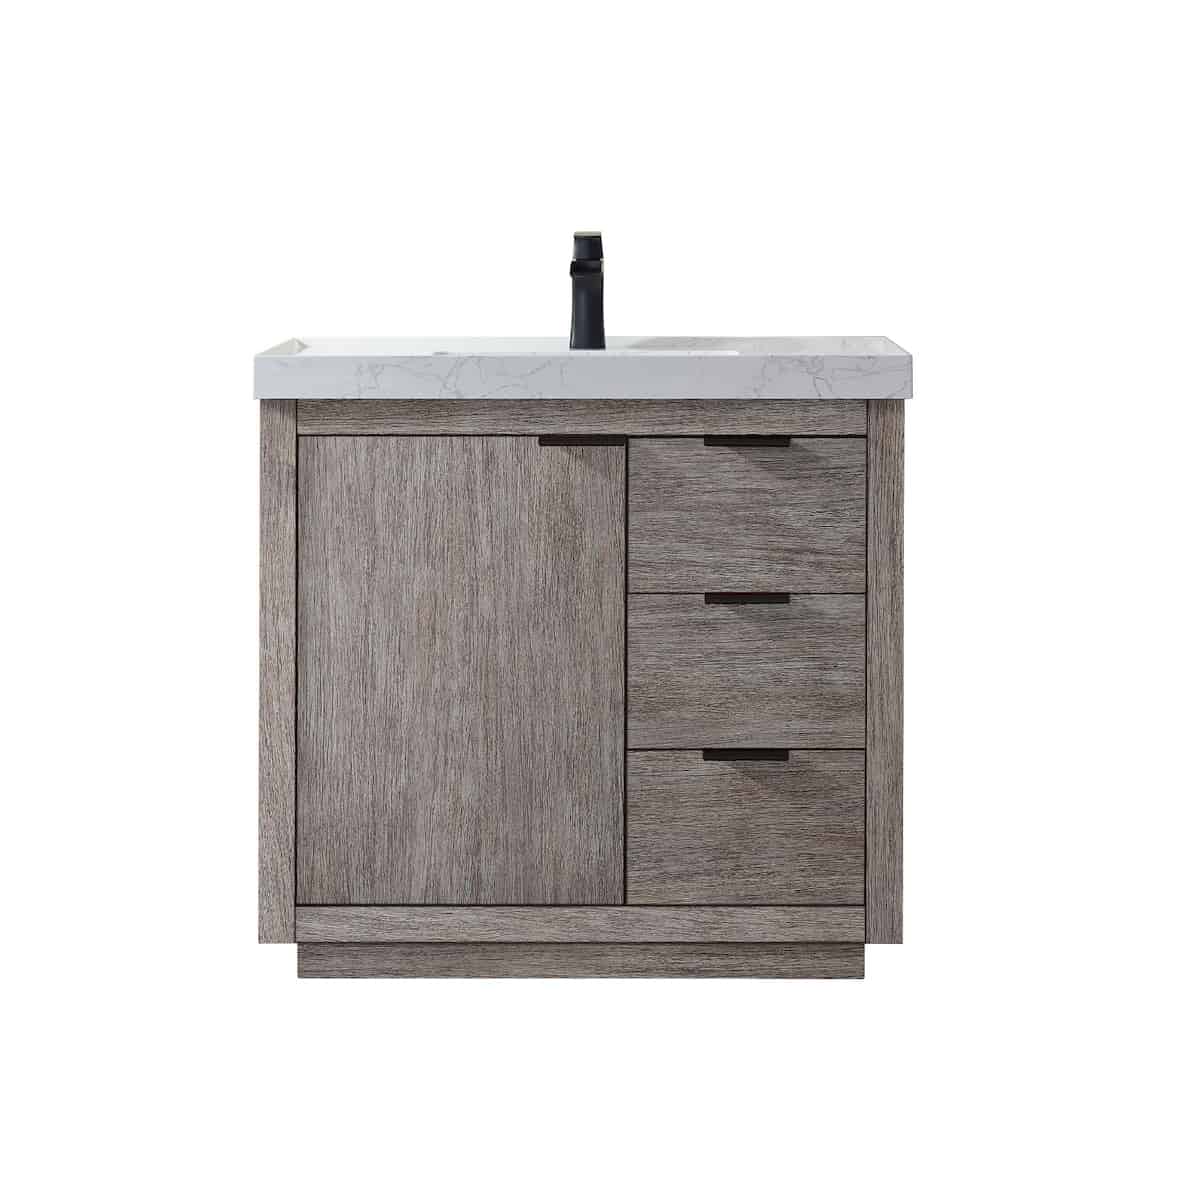 Vinnova Leiza 36 Inch Freestanding Single Sink Vanity in Classical Grey with White Composite Grain Countertop Without Mirror 701536-CR-GW-NM